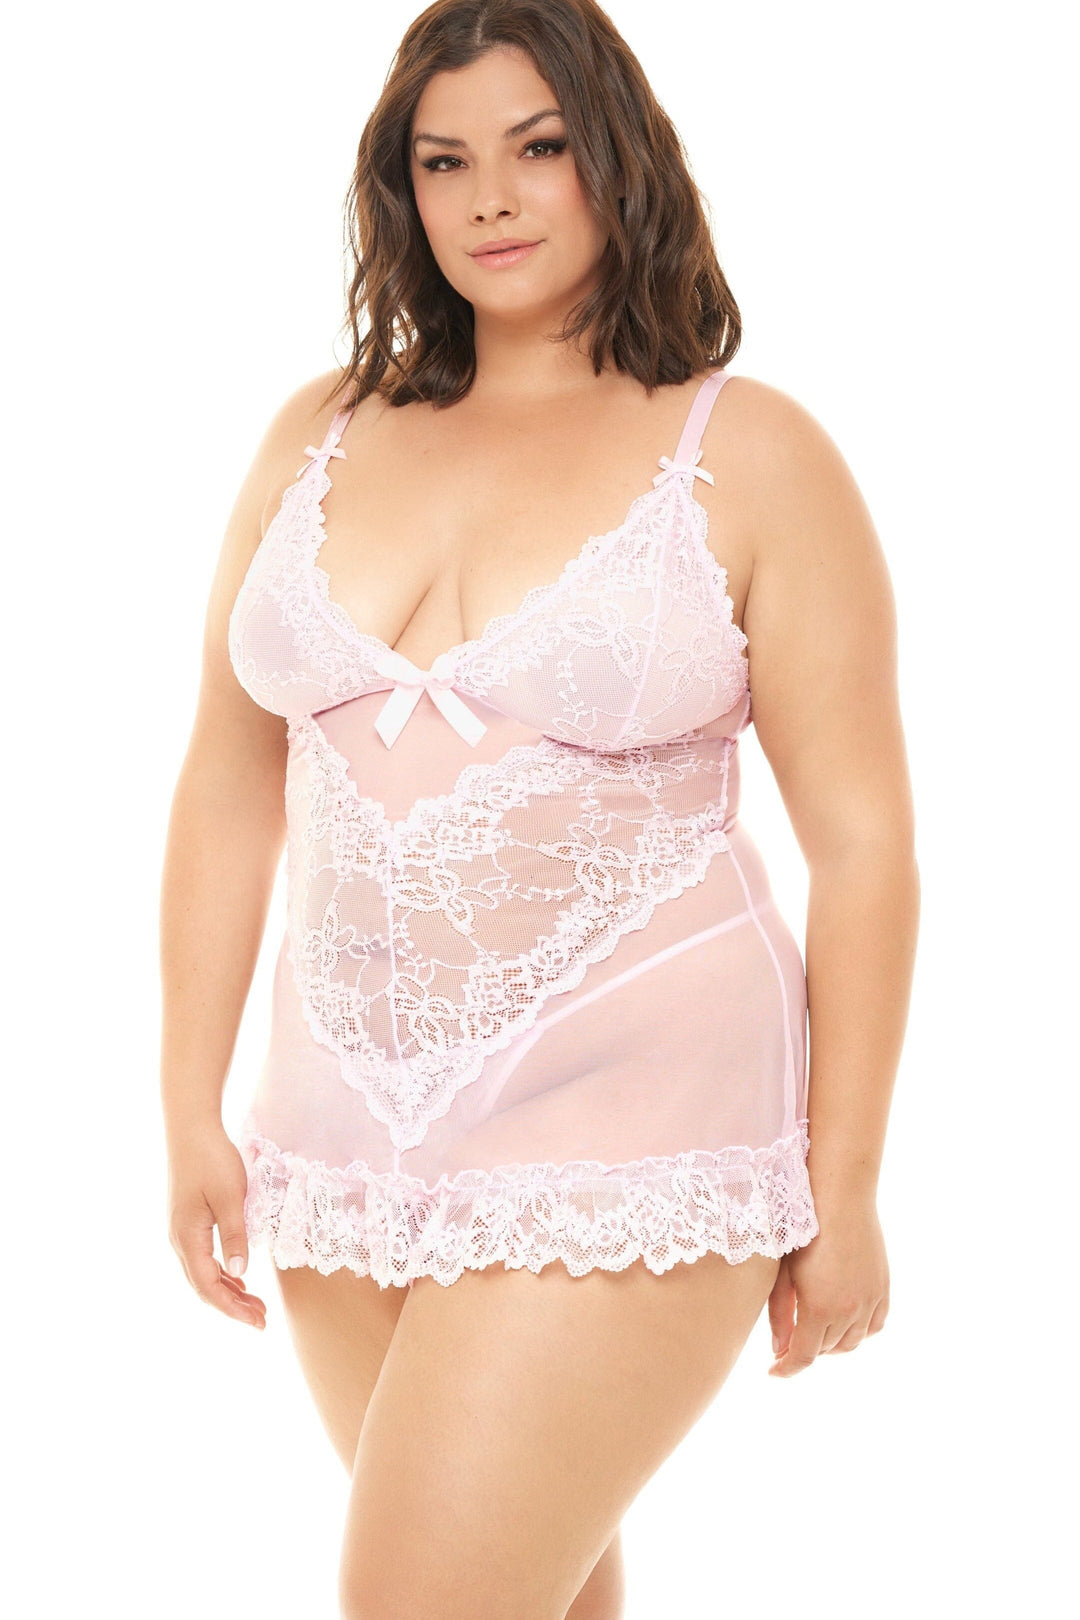 Soft Cup Lacey Babydoll With Bows And G-String-Babydolls-Oh La La Cheri-Pink-3X/4X-SEXYSHOES.COM